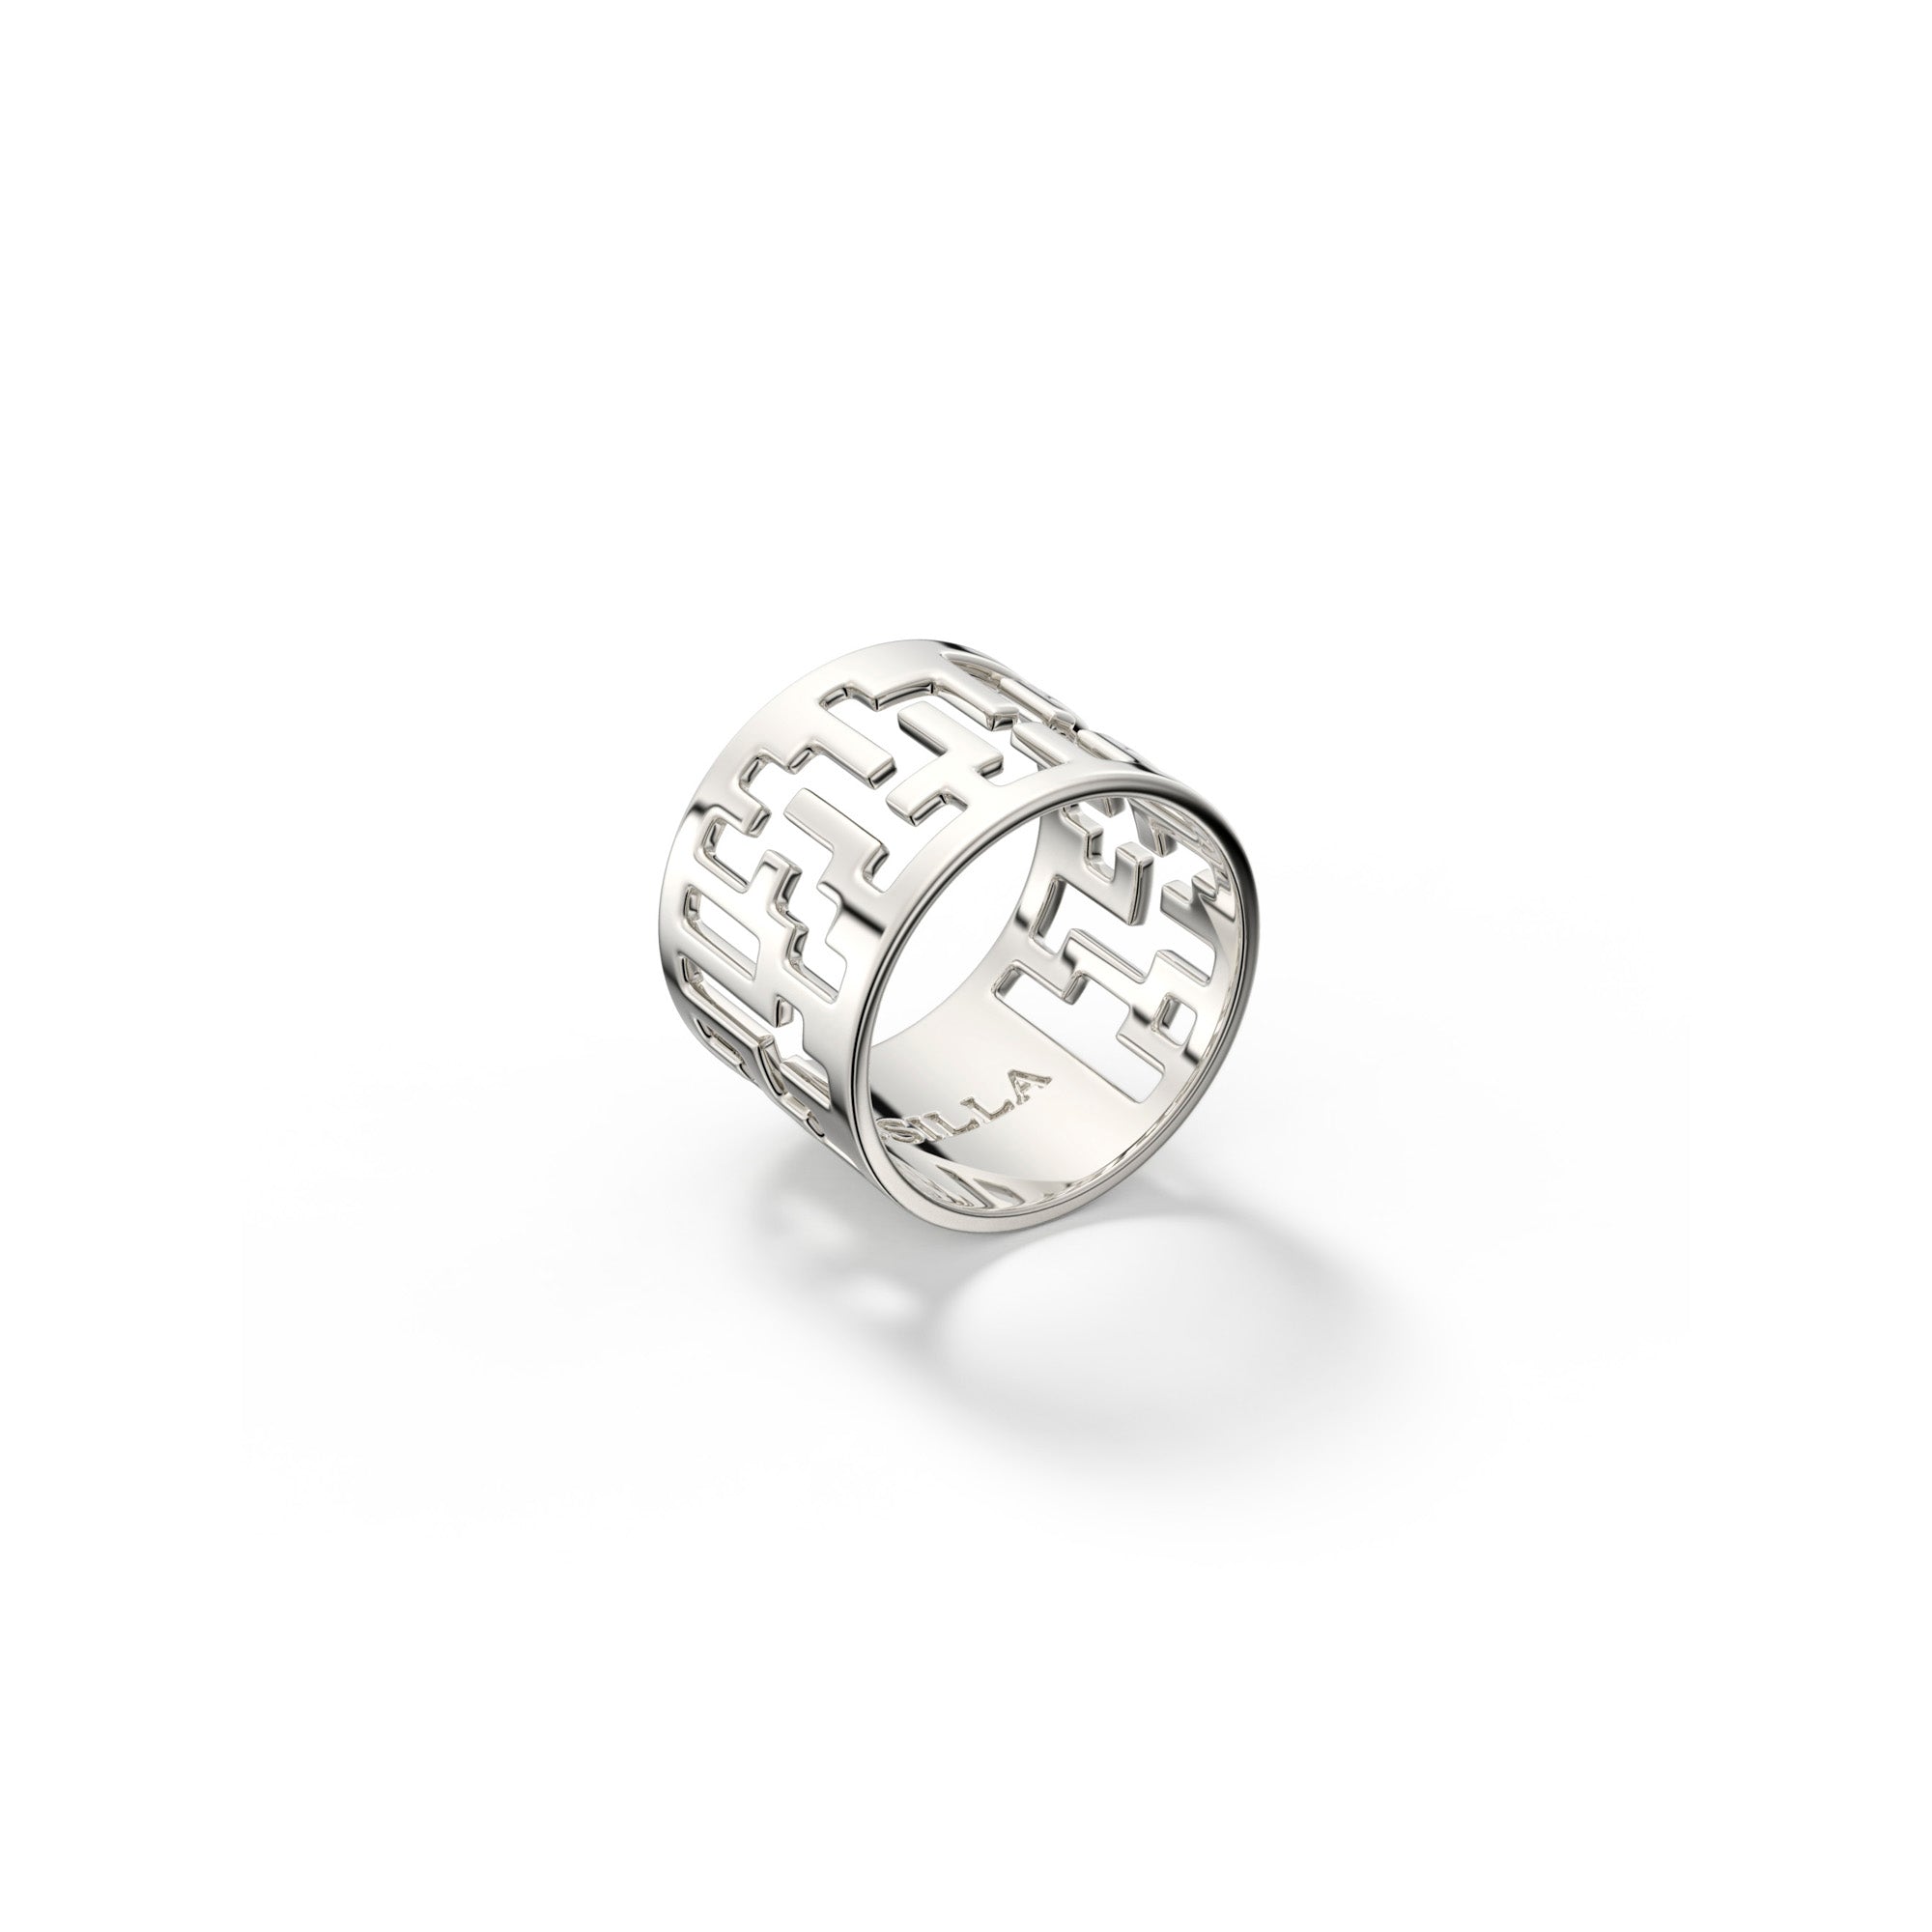 'A-Māz-Me' Icy Large White Gold Ring